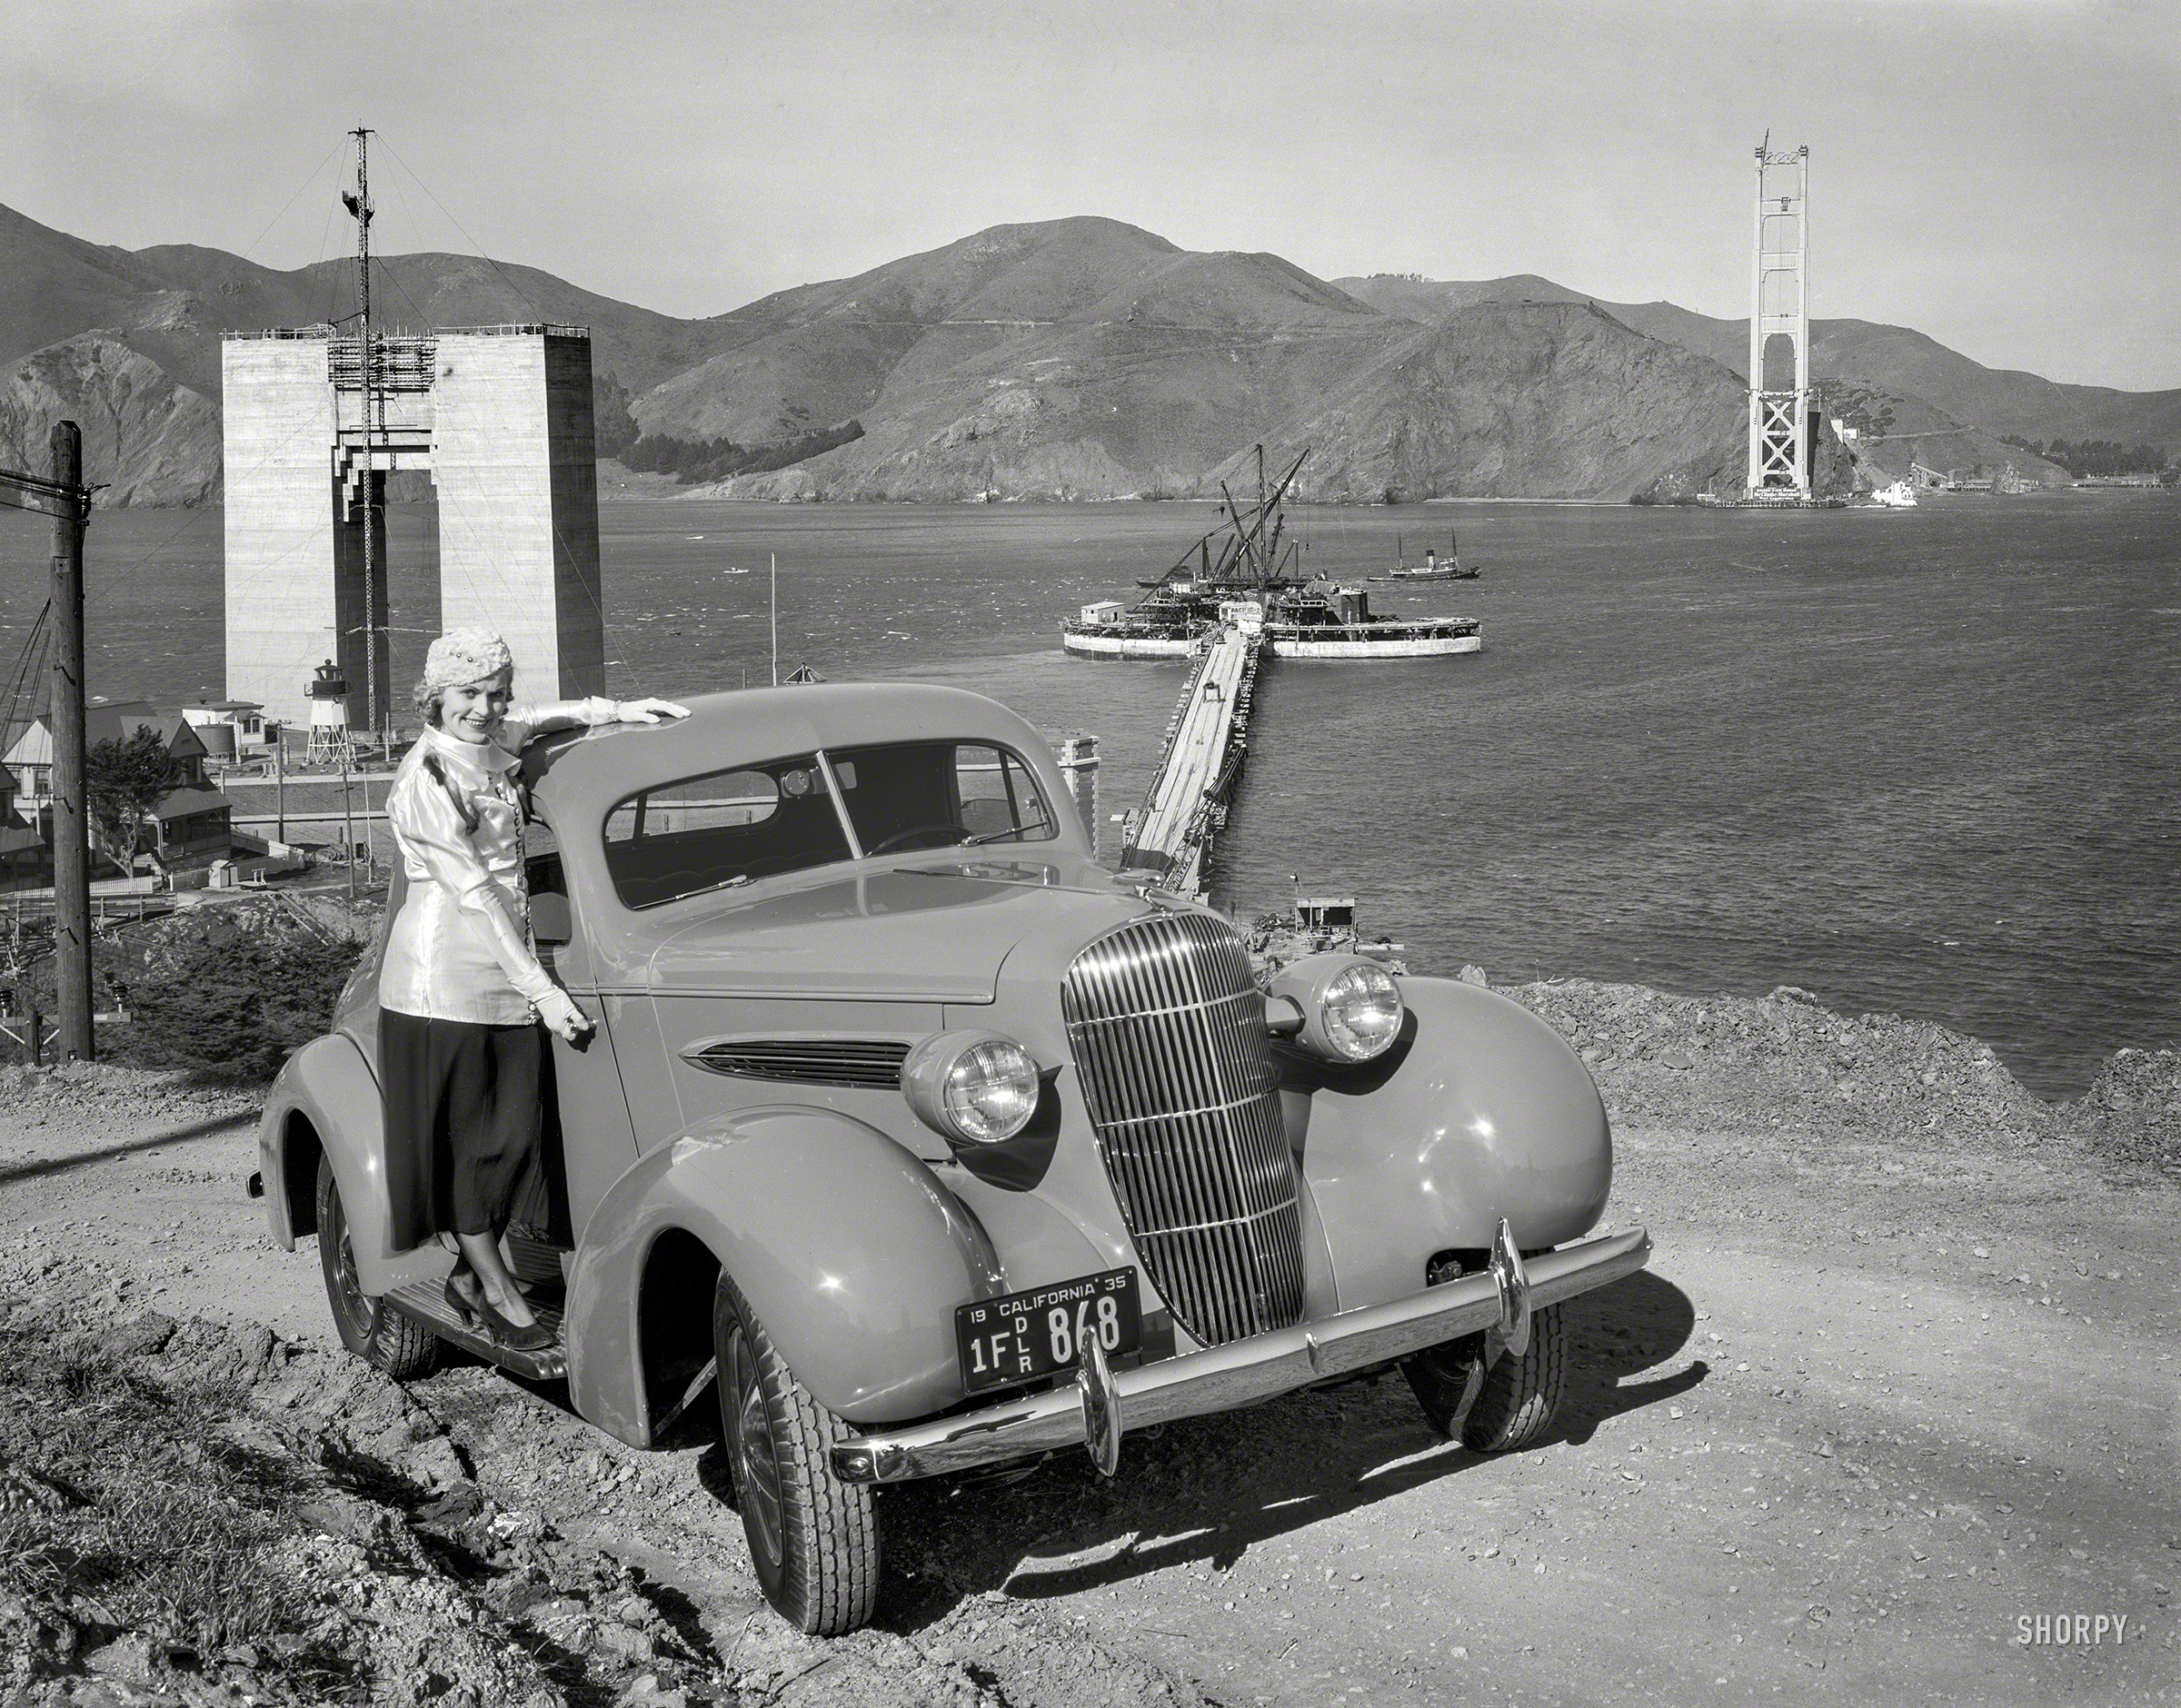 San Francisco, 1935. "Oldsmobile coupe and Golden Gate Bridge under construction." Only two more years and this lady will be able to cross. 8x10 film negative, originally from the Wyland Stanley collection. View full size.